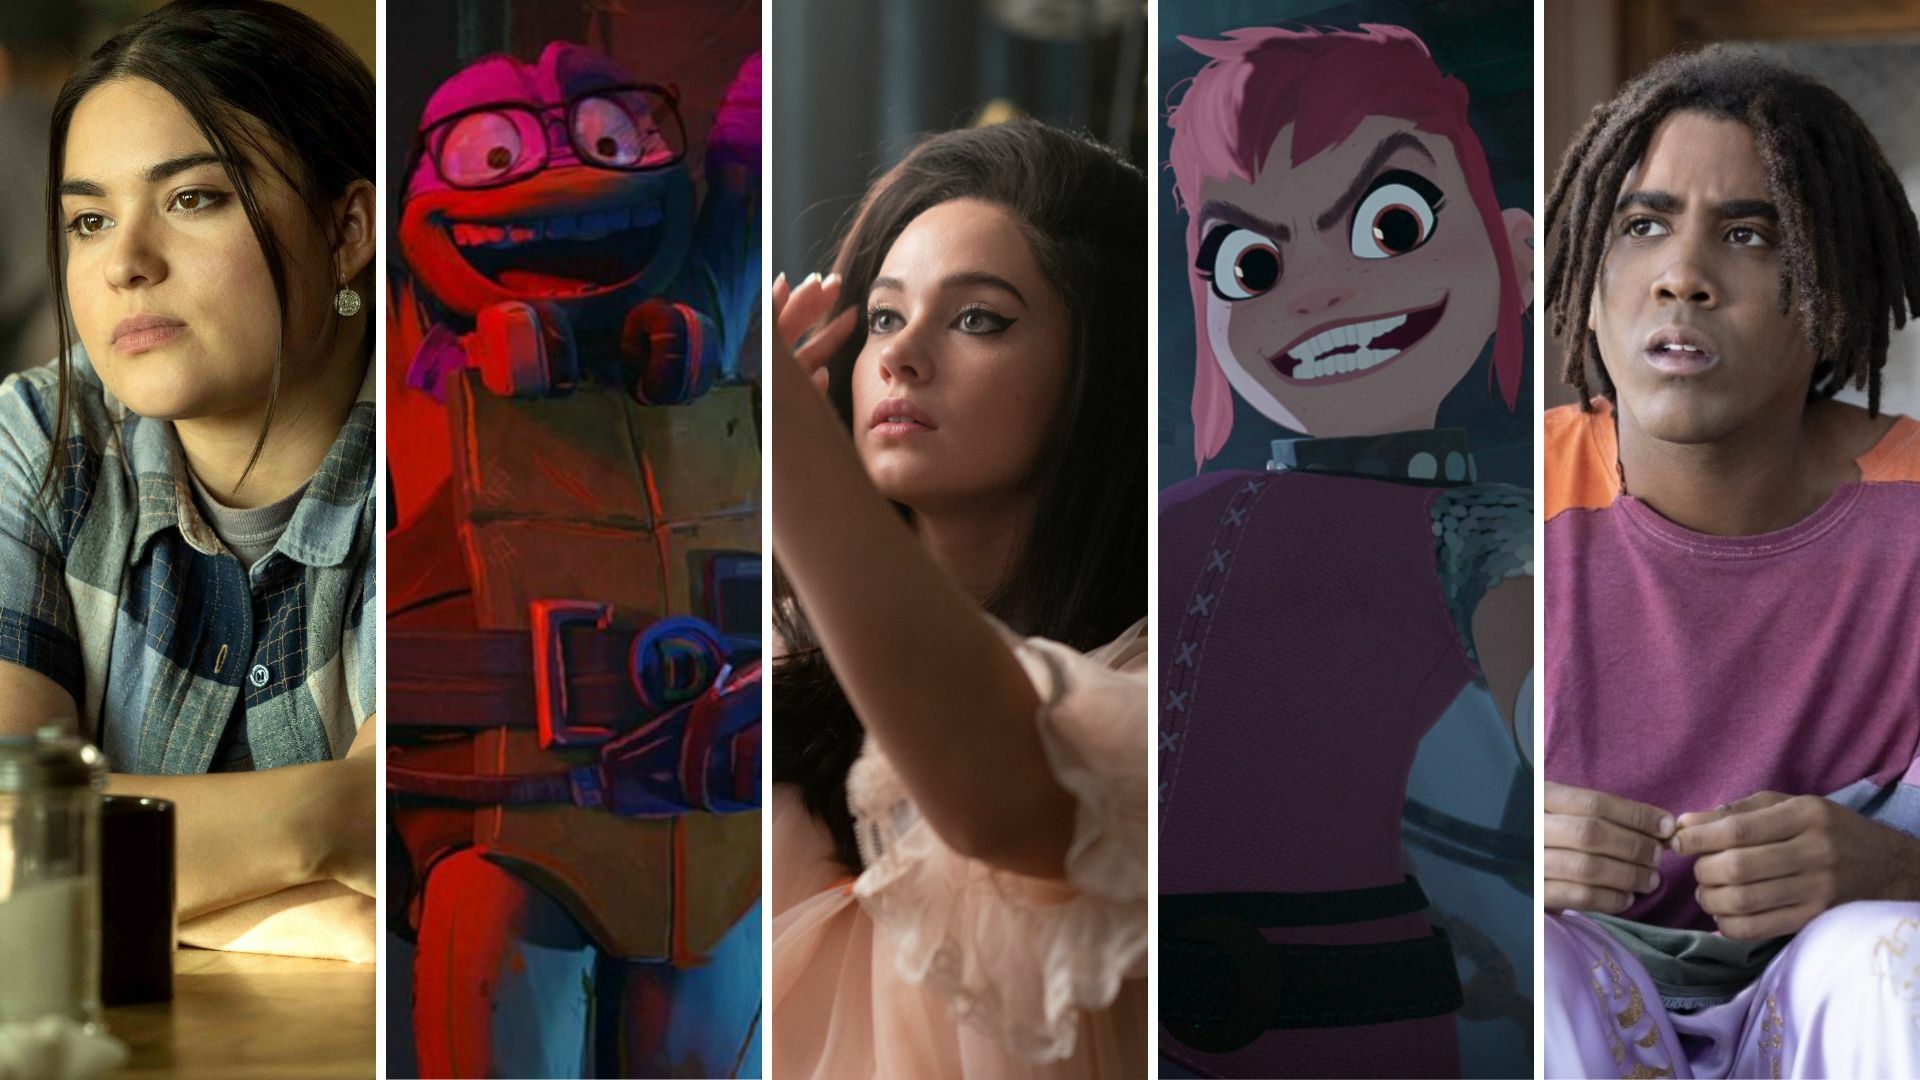 Five images: A young woman in a diner, a Teenage Mutant Ninja Turtle with his arms up in excitement, a young woman applying eyelines, a young woman with pink hair and an evil grin, a giant sitting on the front stoop of his house.